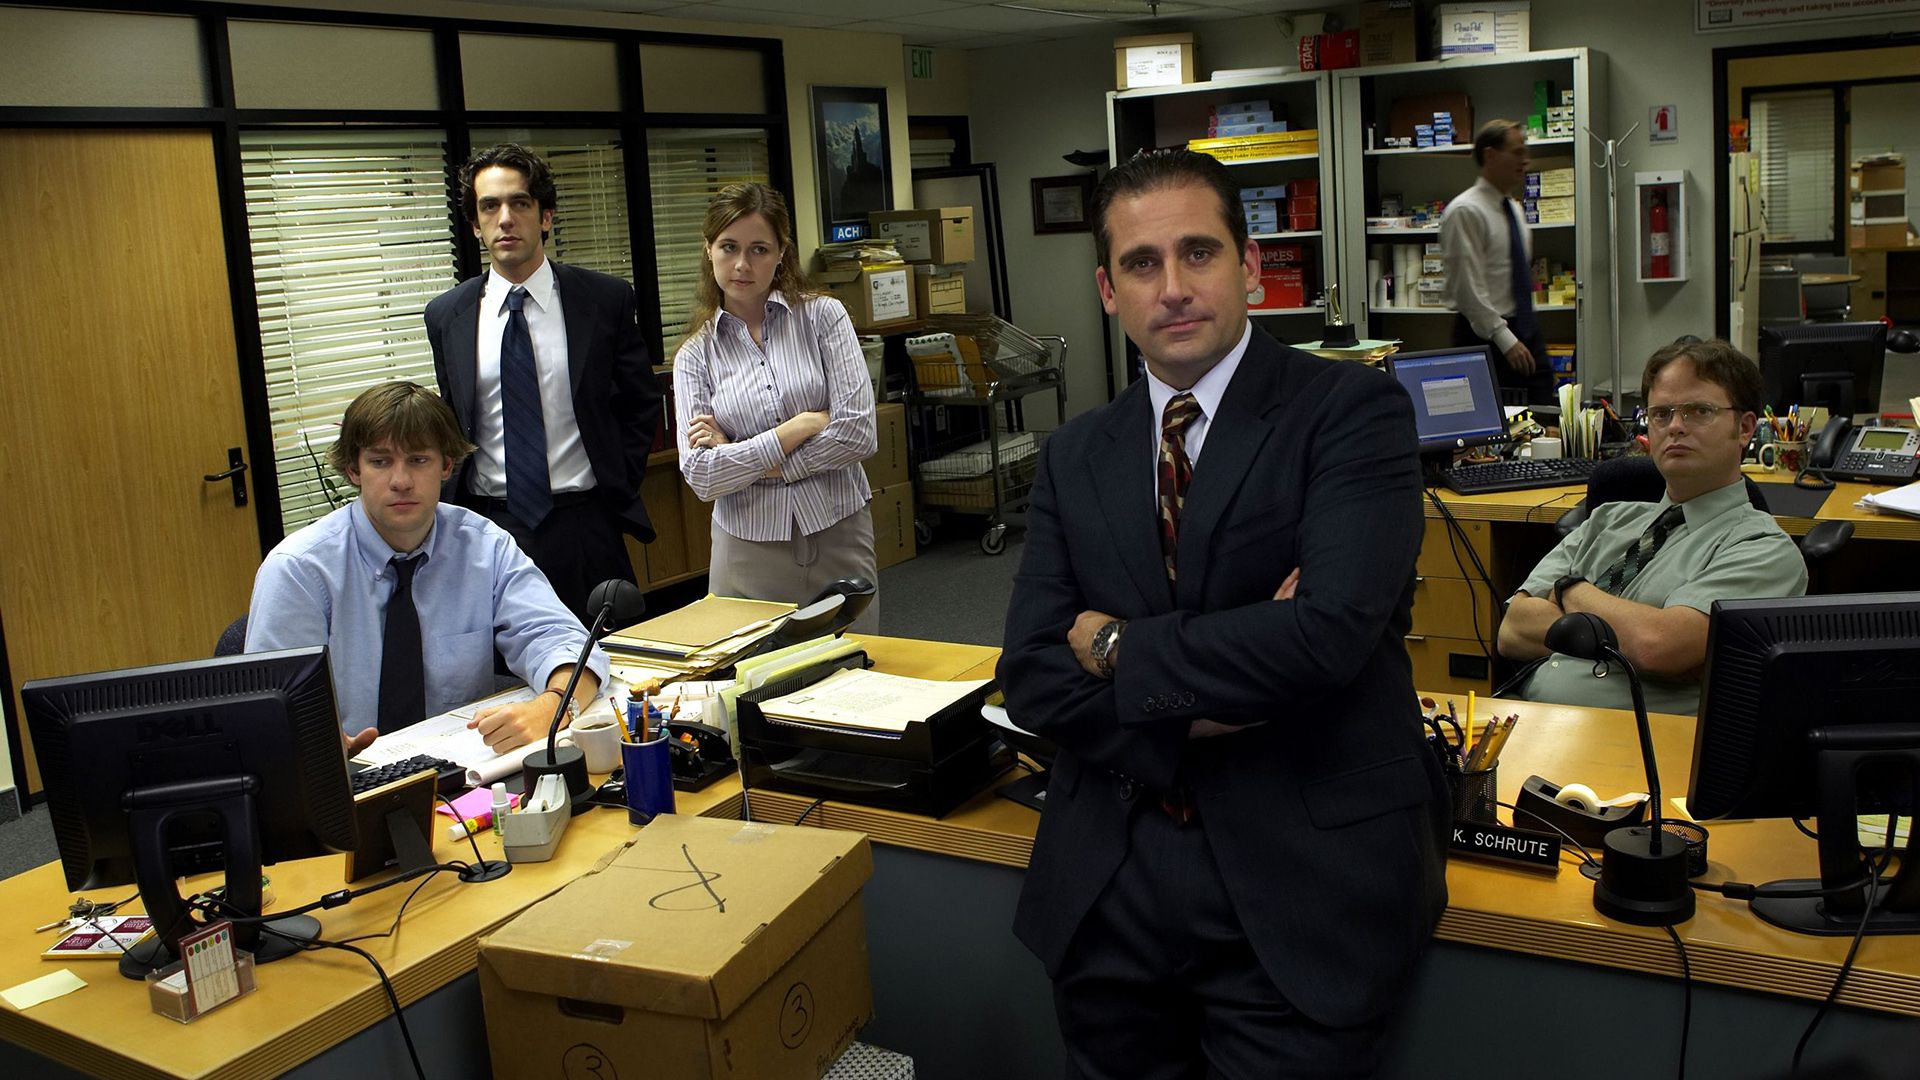 The Office (US) Wallpaper, Picture, Image